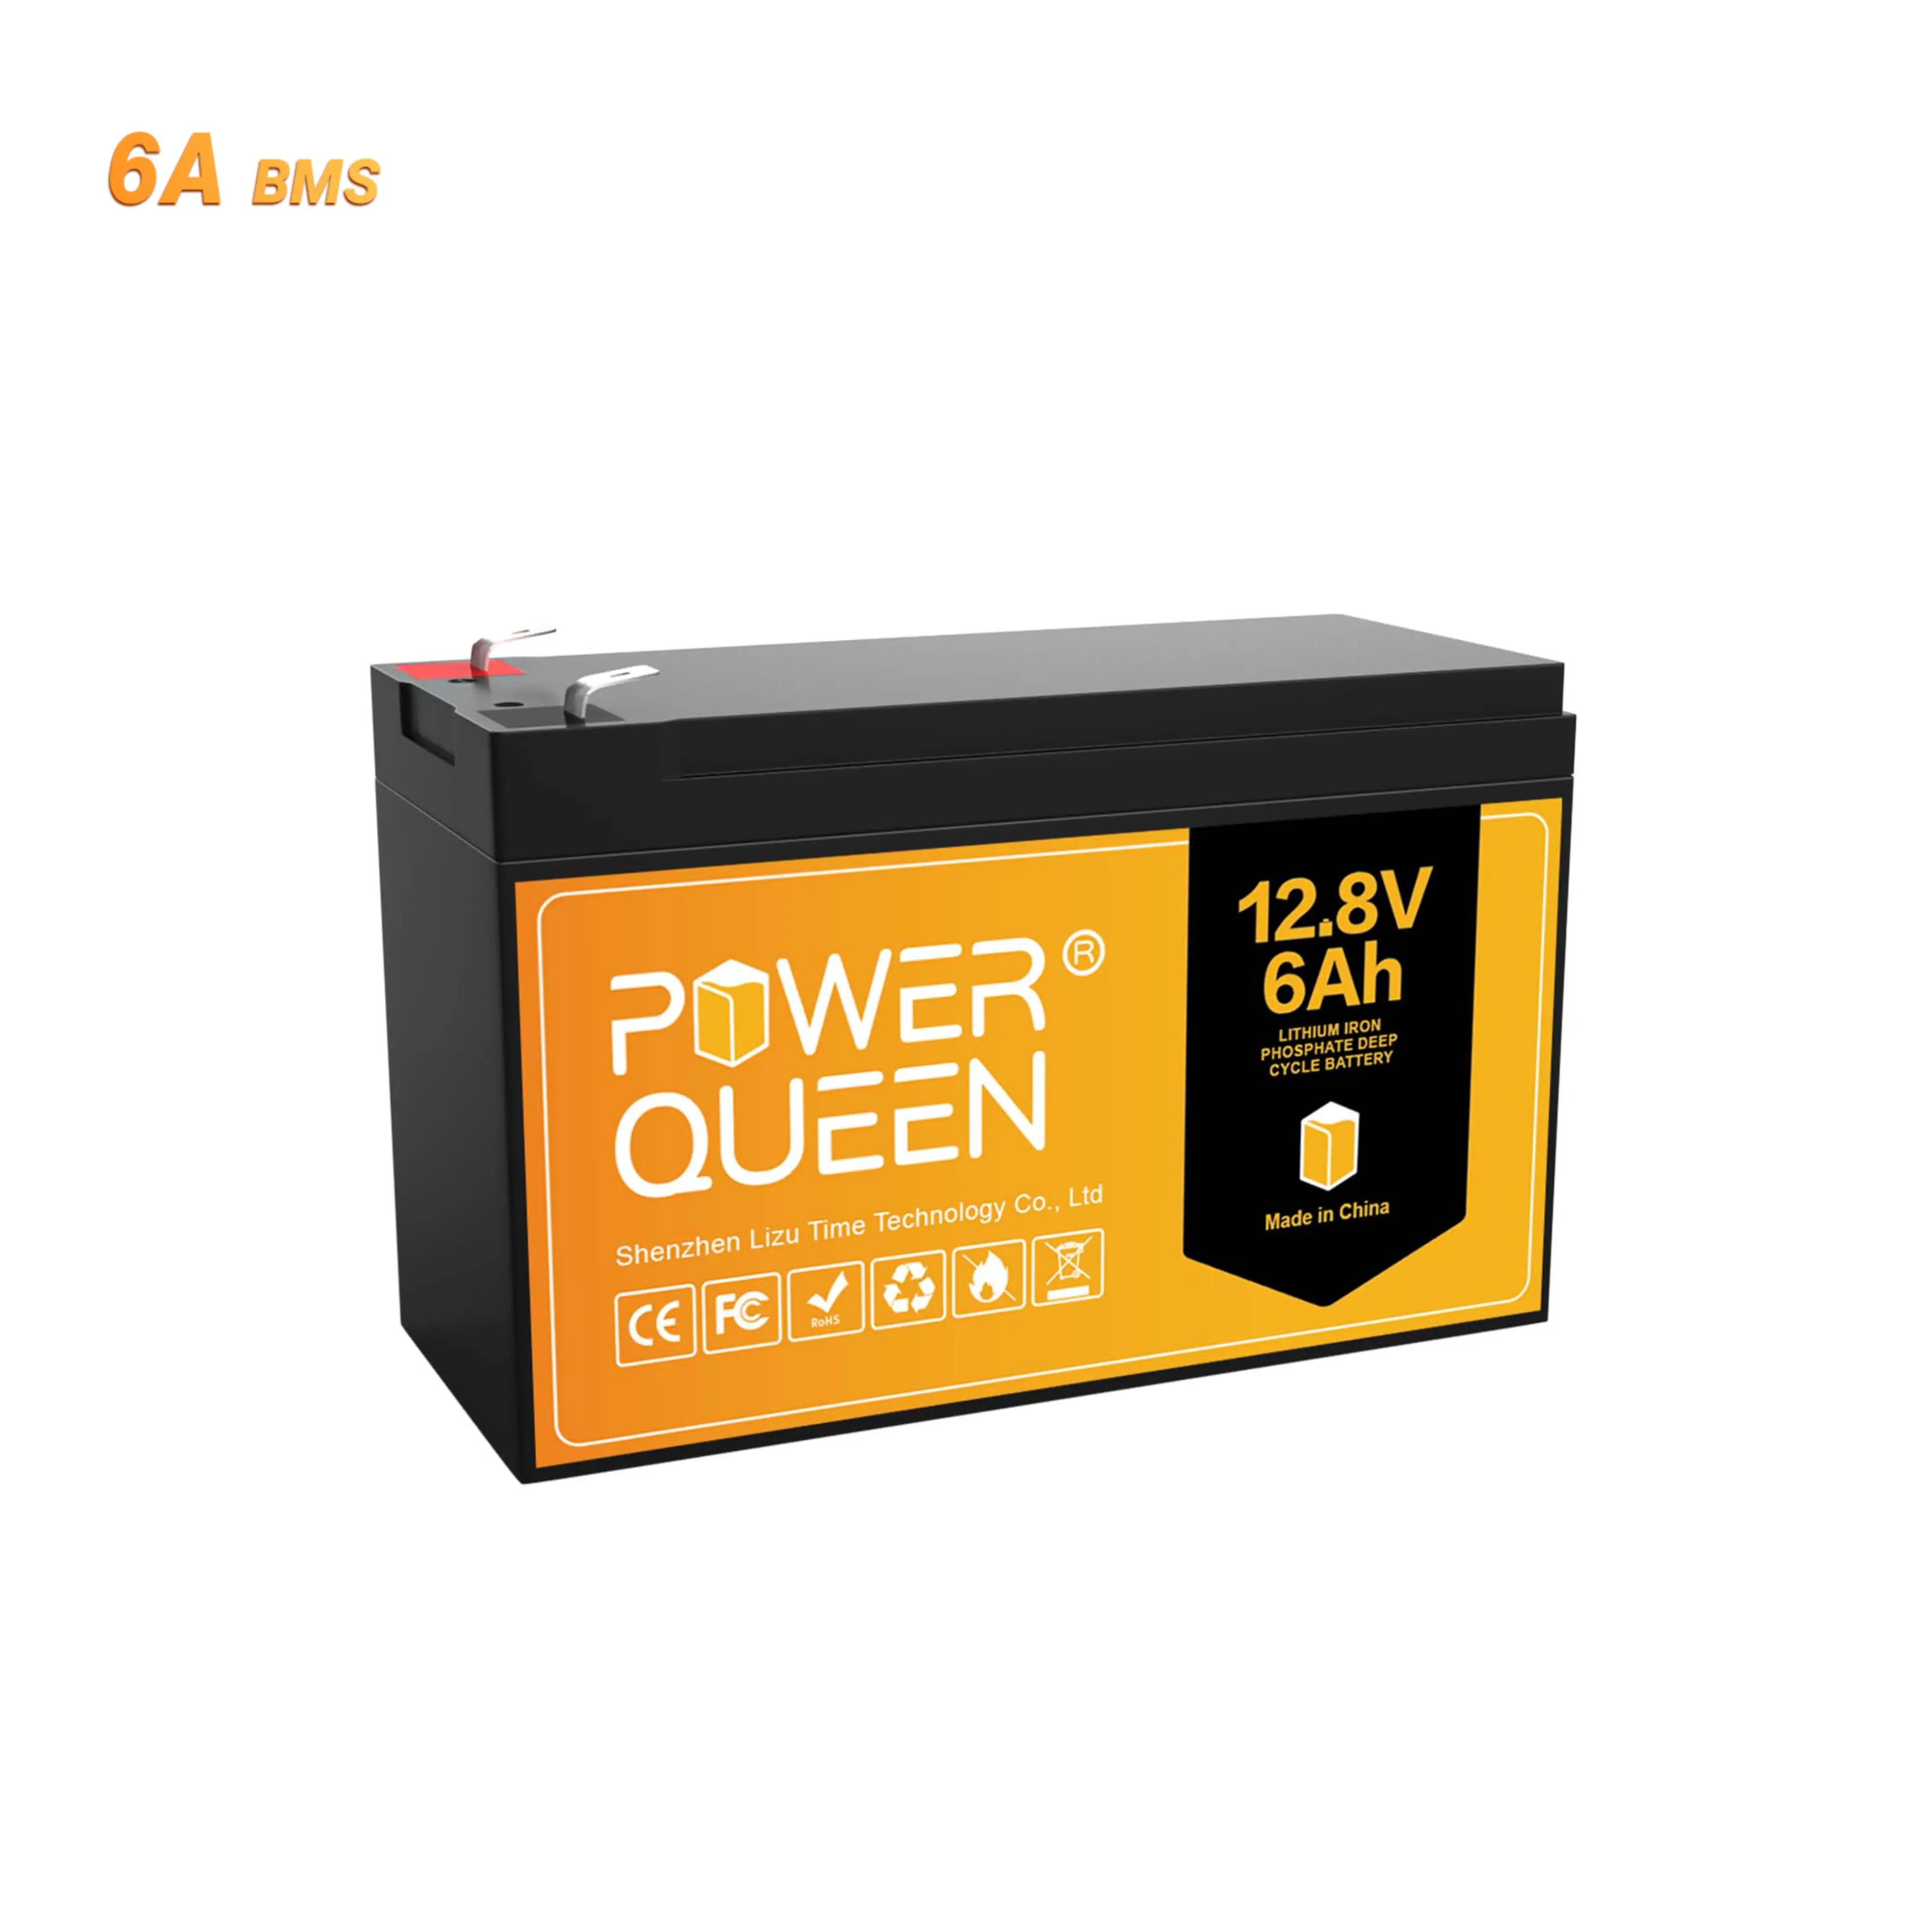 Power Queen 12V 6Ah LiFePO4 battery, built-in 6A BMS